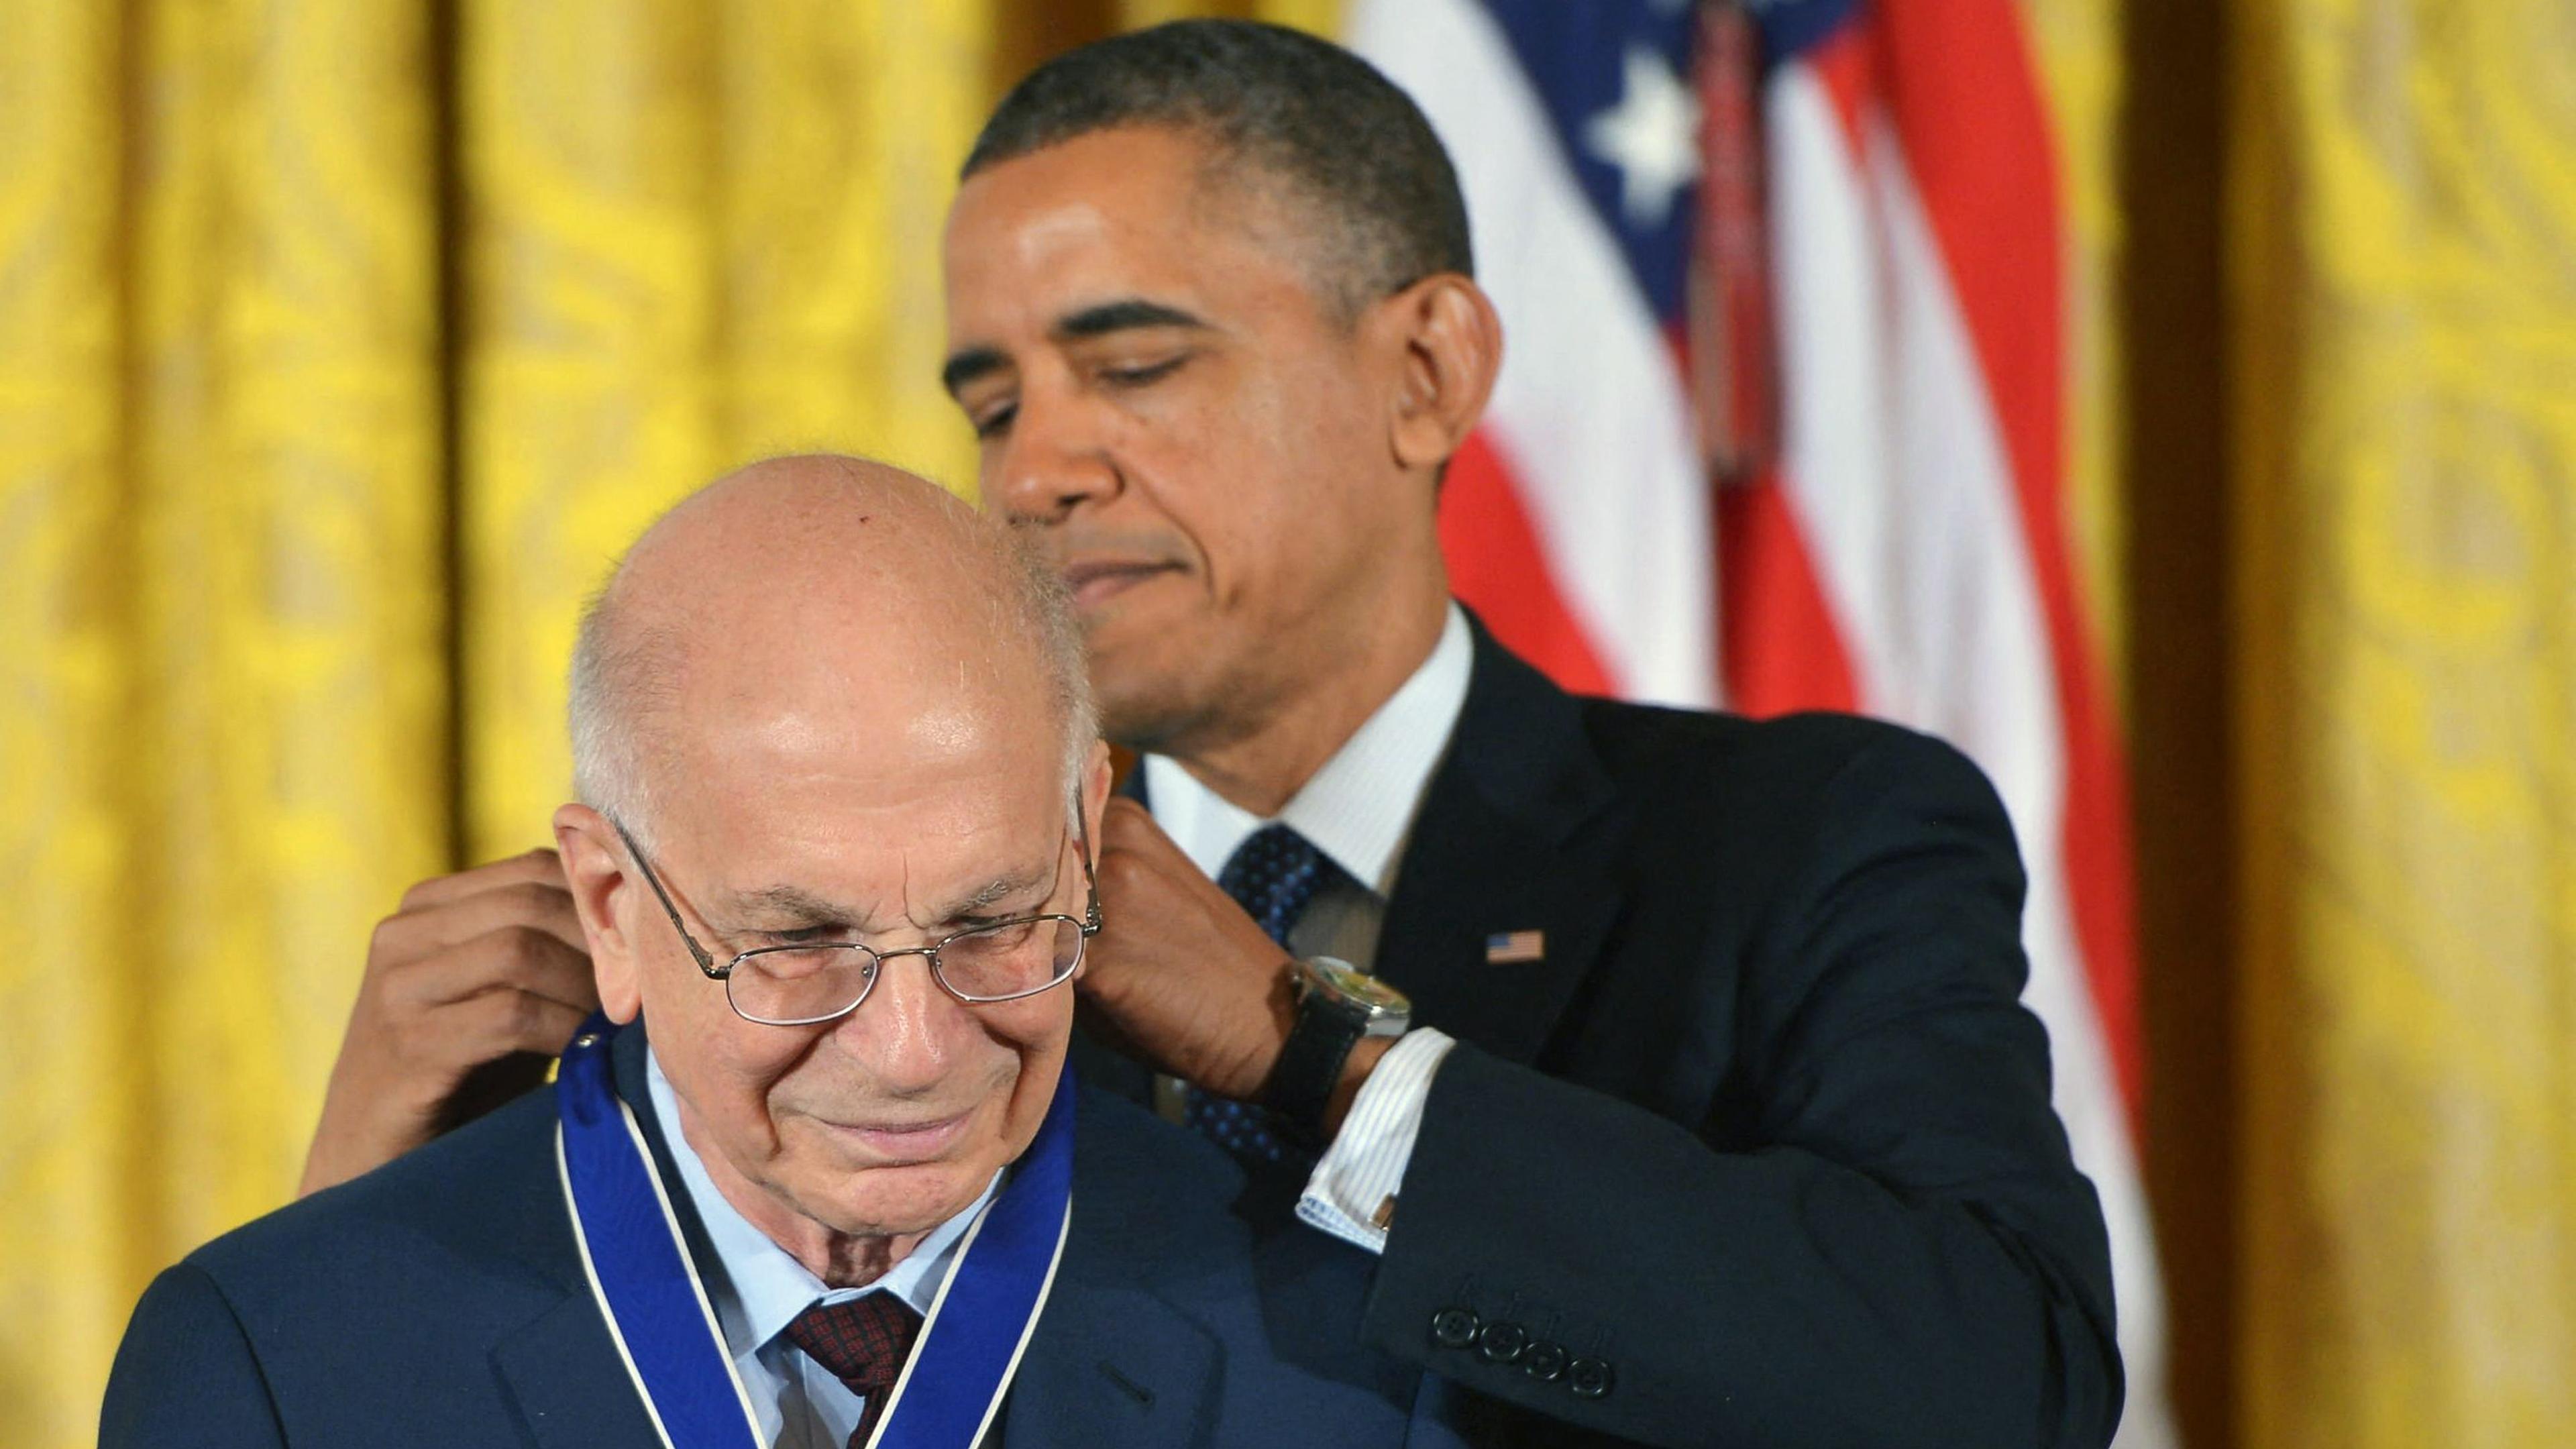 (FILES) US President Barack Obama presents the Presidential Medal of Freedom to psychologist Daniel Kahneman during a ceremony in the East Room of the White House on November 20, 2013 in Washington, DC. Nobel Prize winner Daniel Kahneman, who pioneered theories in behavioral economics that heavily influenced the discipline, has died at age 90, his employer confirmed March 27.
Kahneman, who wrote best-selling book "Thinking, Fast and Slow," argued against the notion that people's behavior is rooted in a rational decision-making process -- rather that it is often based on instinct. (Photo by Mandel NGAN / AFP)